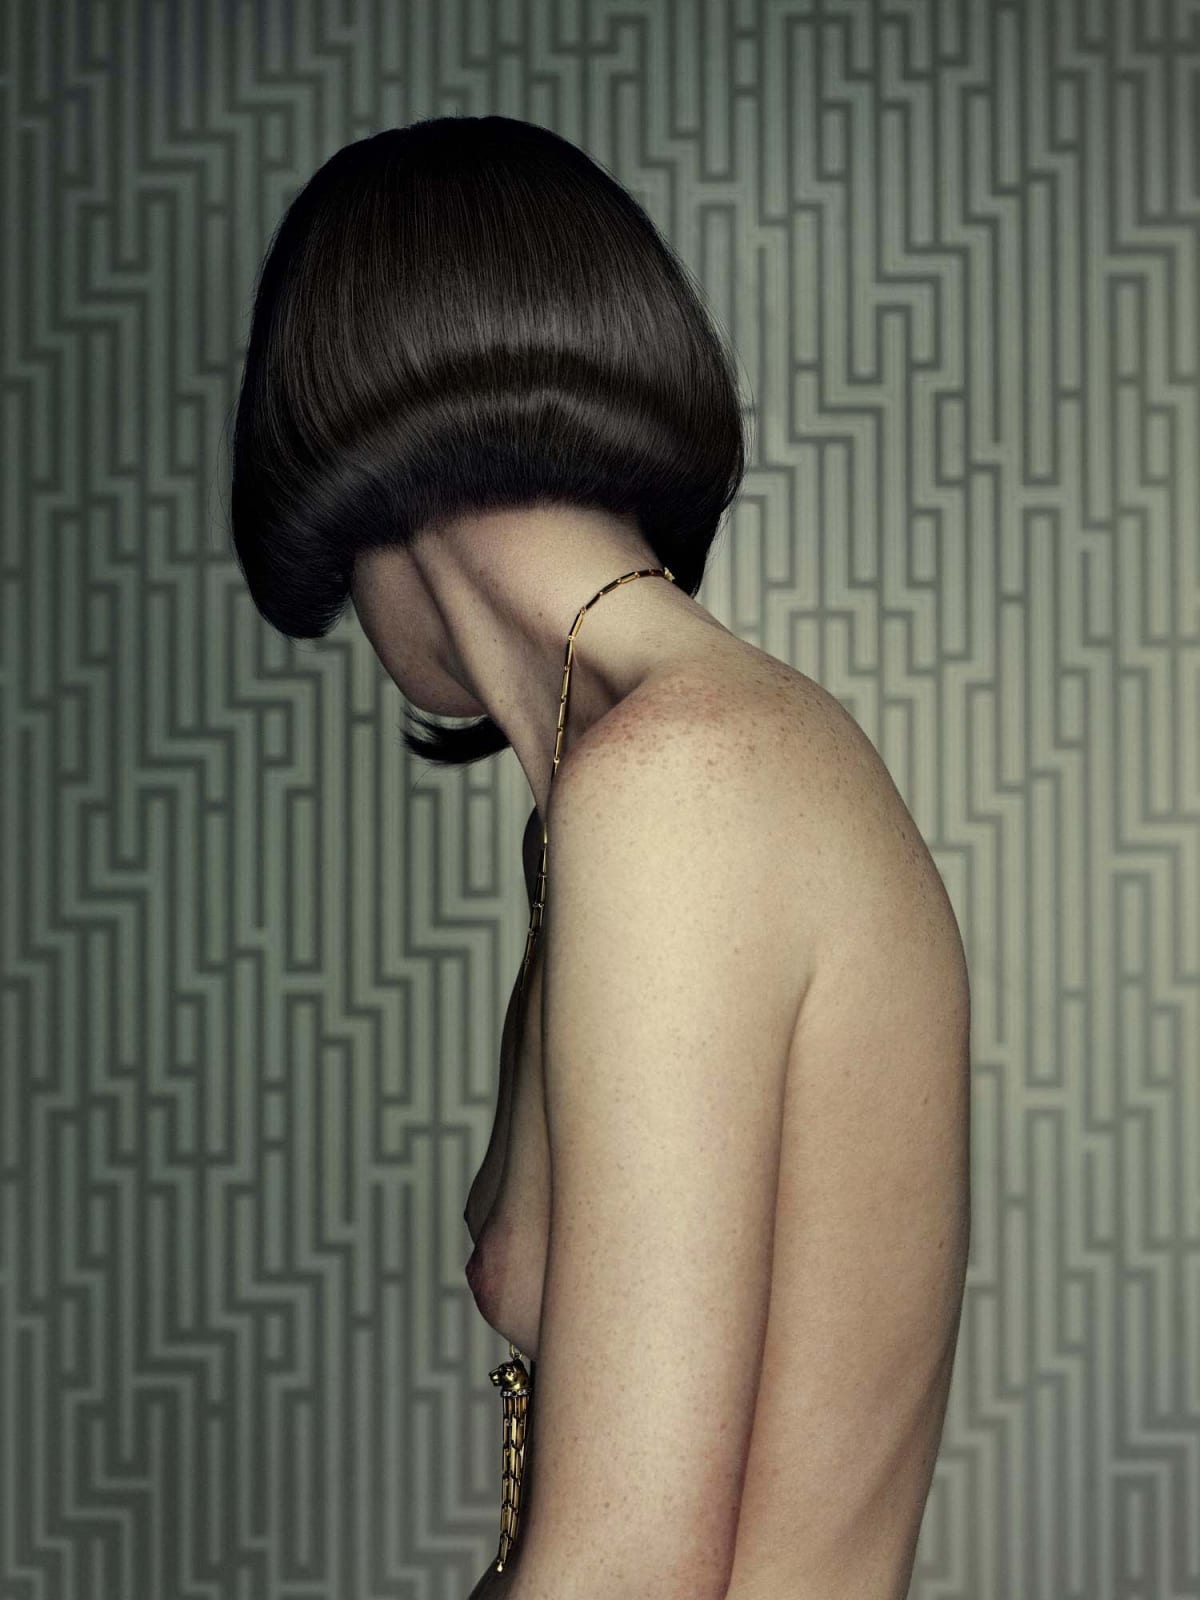 Erwin Olaf portrait of woman from Keyhole series, nude woman with bob haircut turned away from camera with geometric wallpaper in background